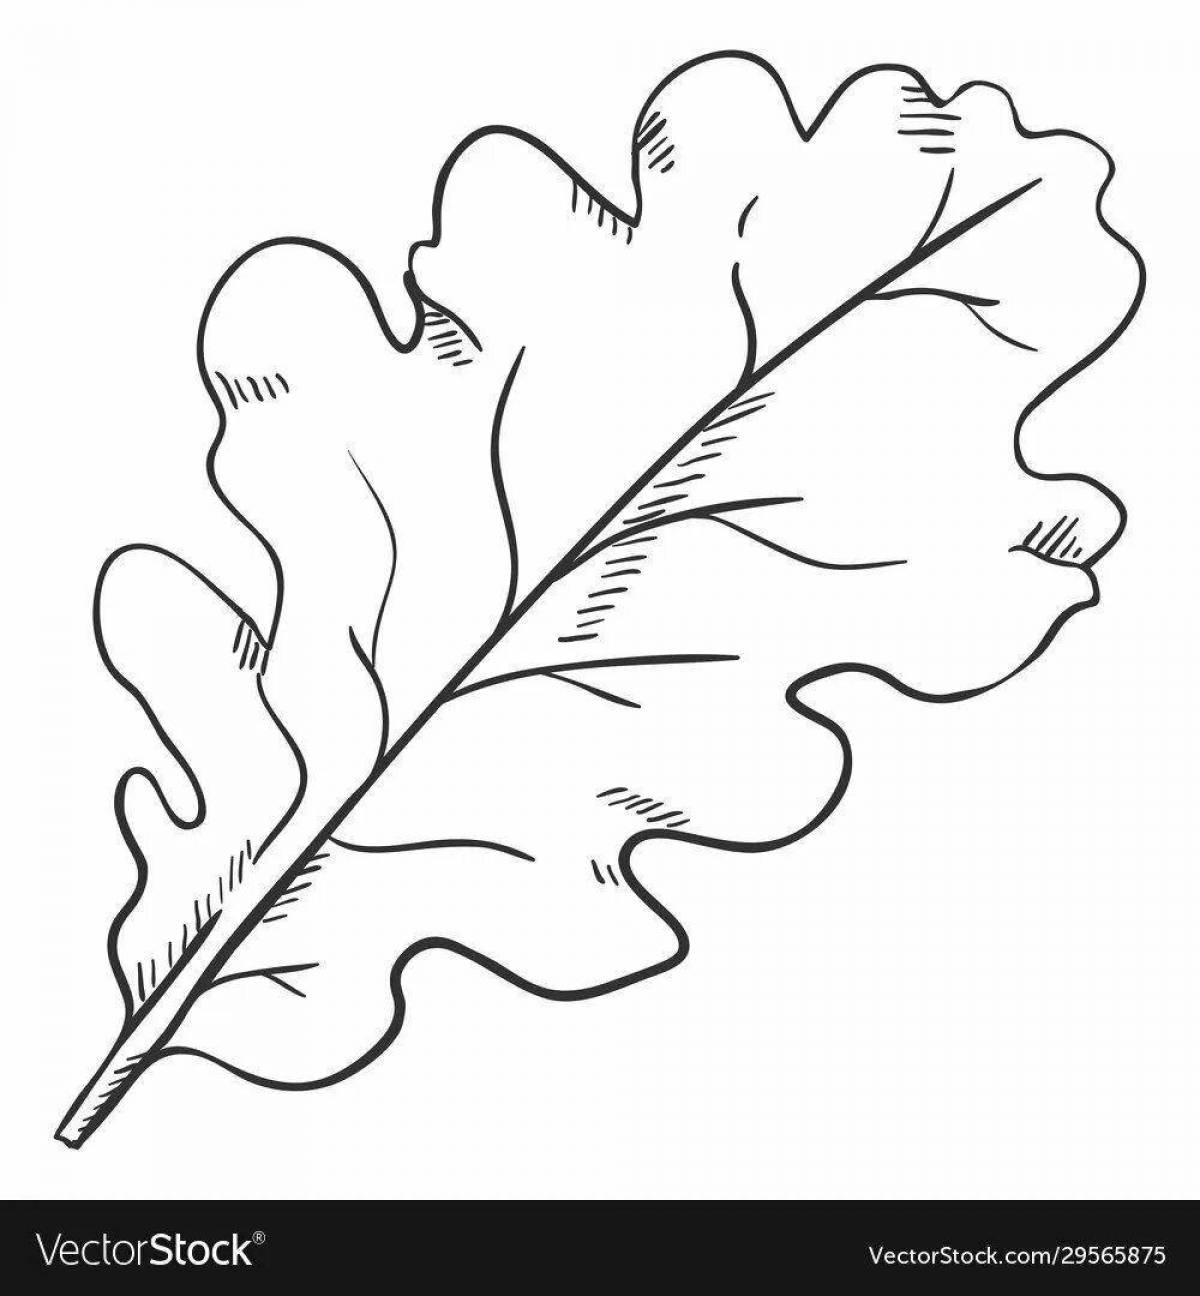 Coloring book brilliantly painted oak leaf